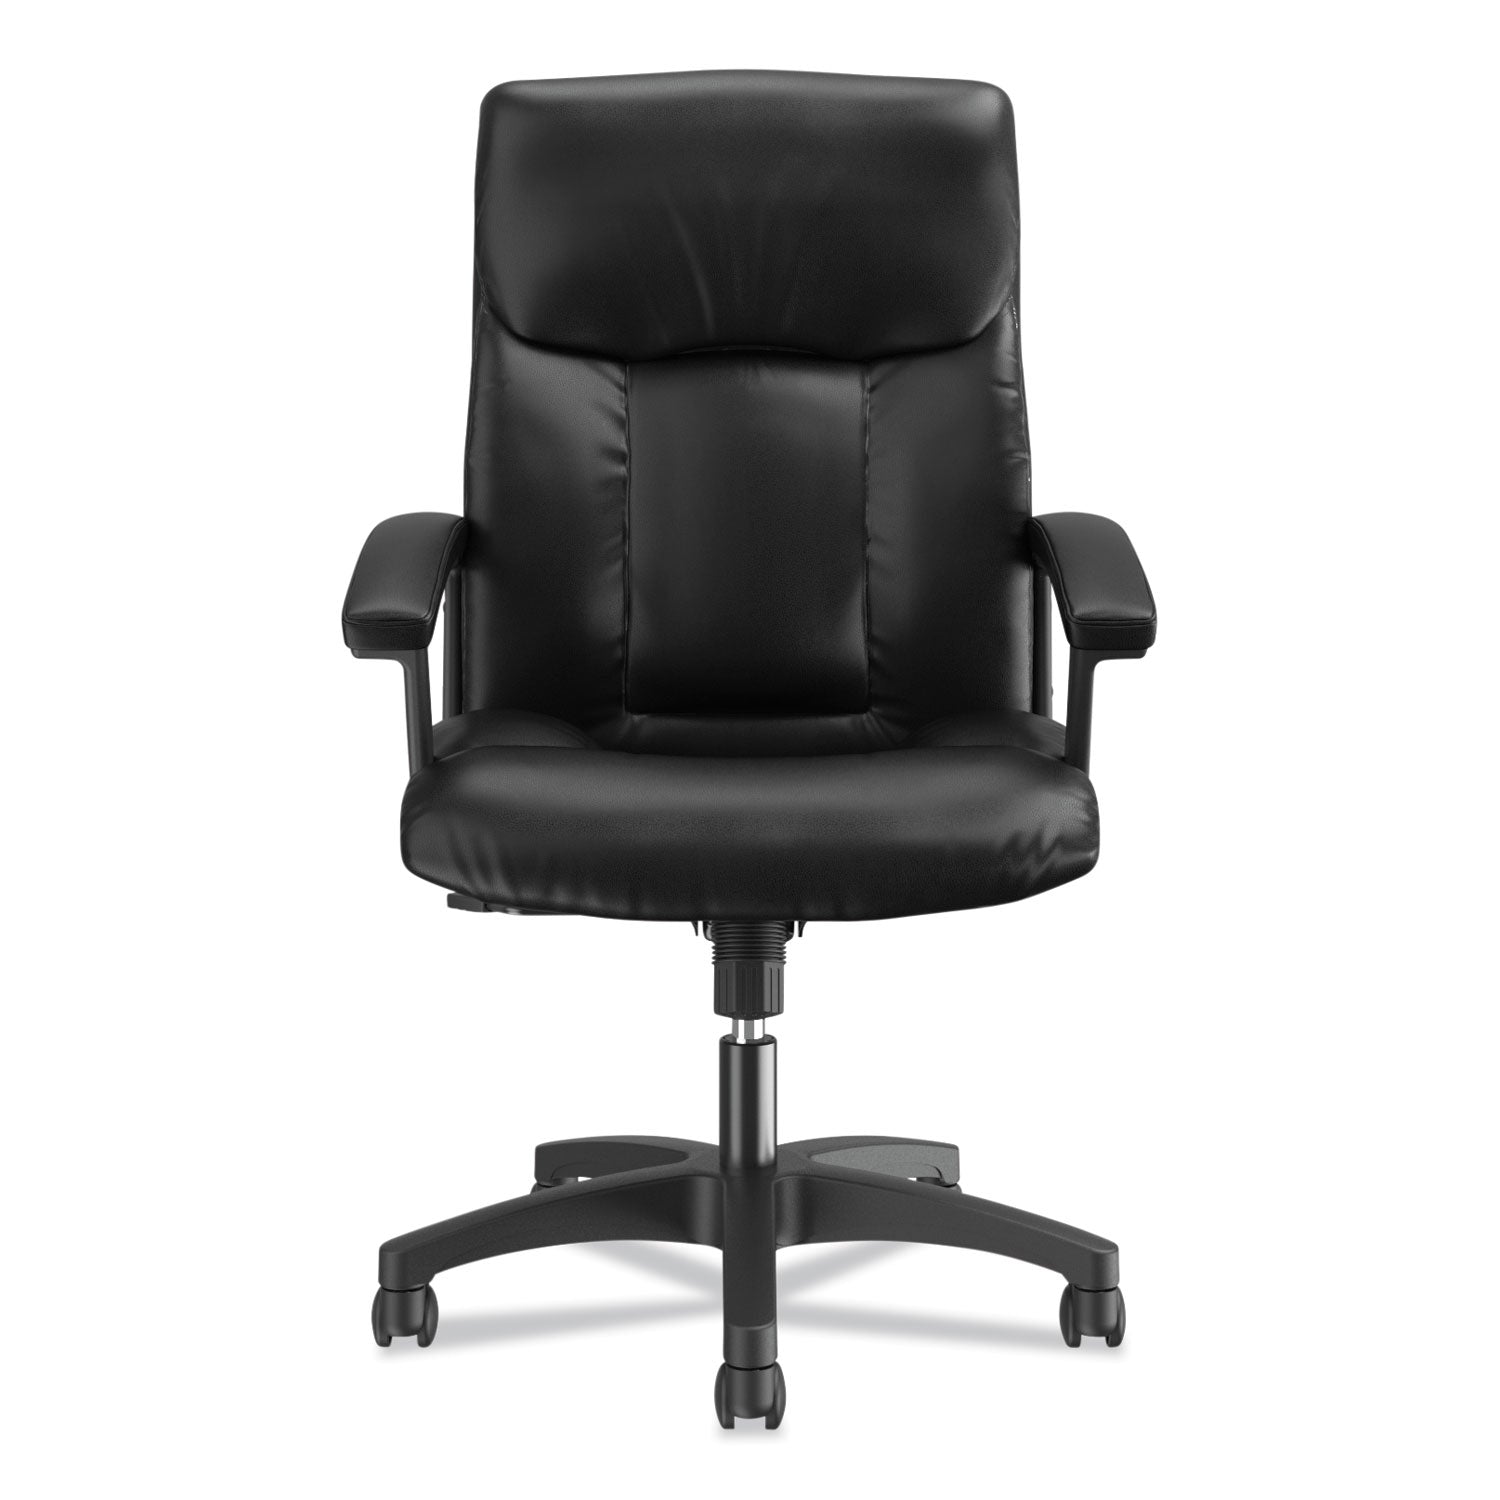 HVL151 Executive High-Back Leather Chair, Supports Up to 250 lb, 17.75" to 21.5" Seat Height, Black - 